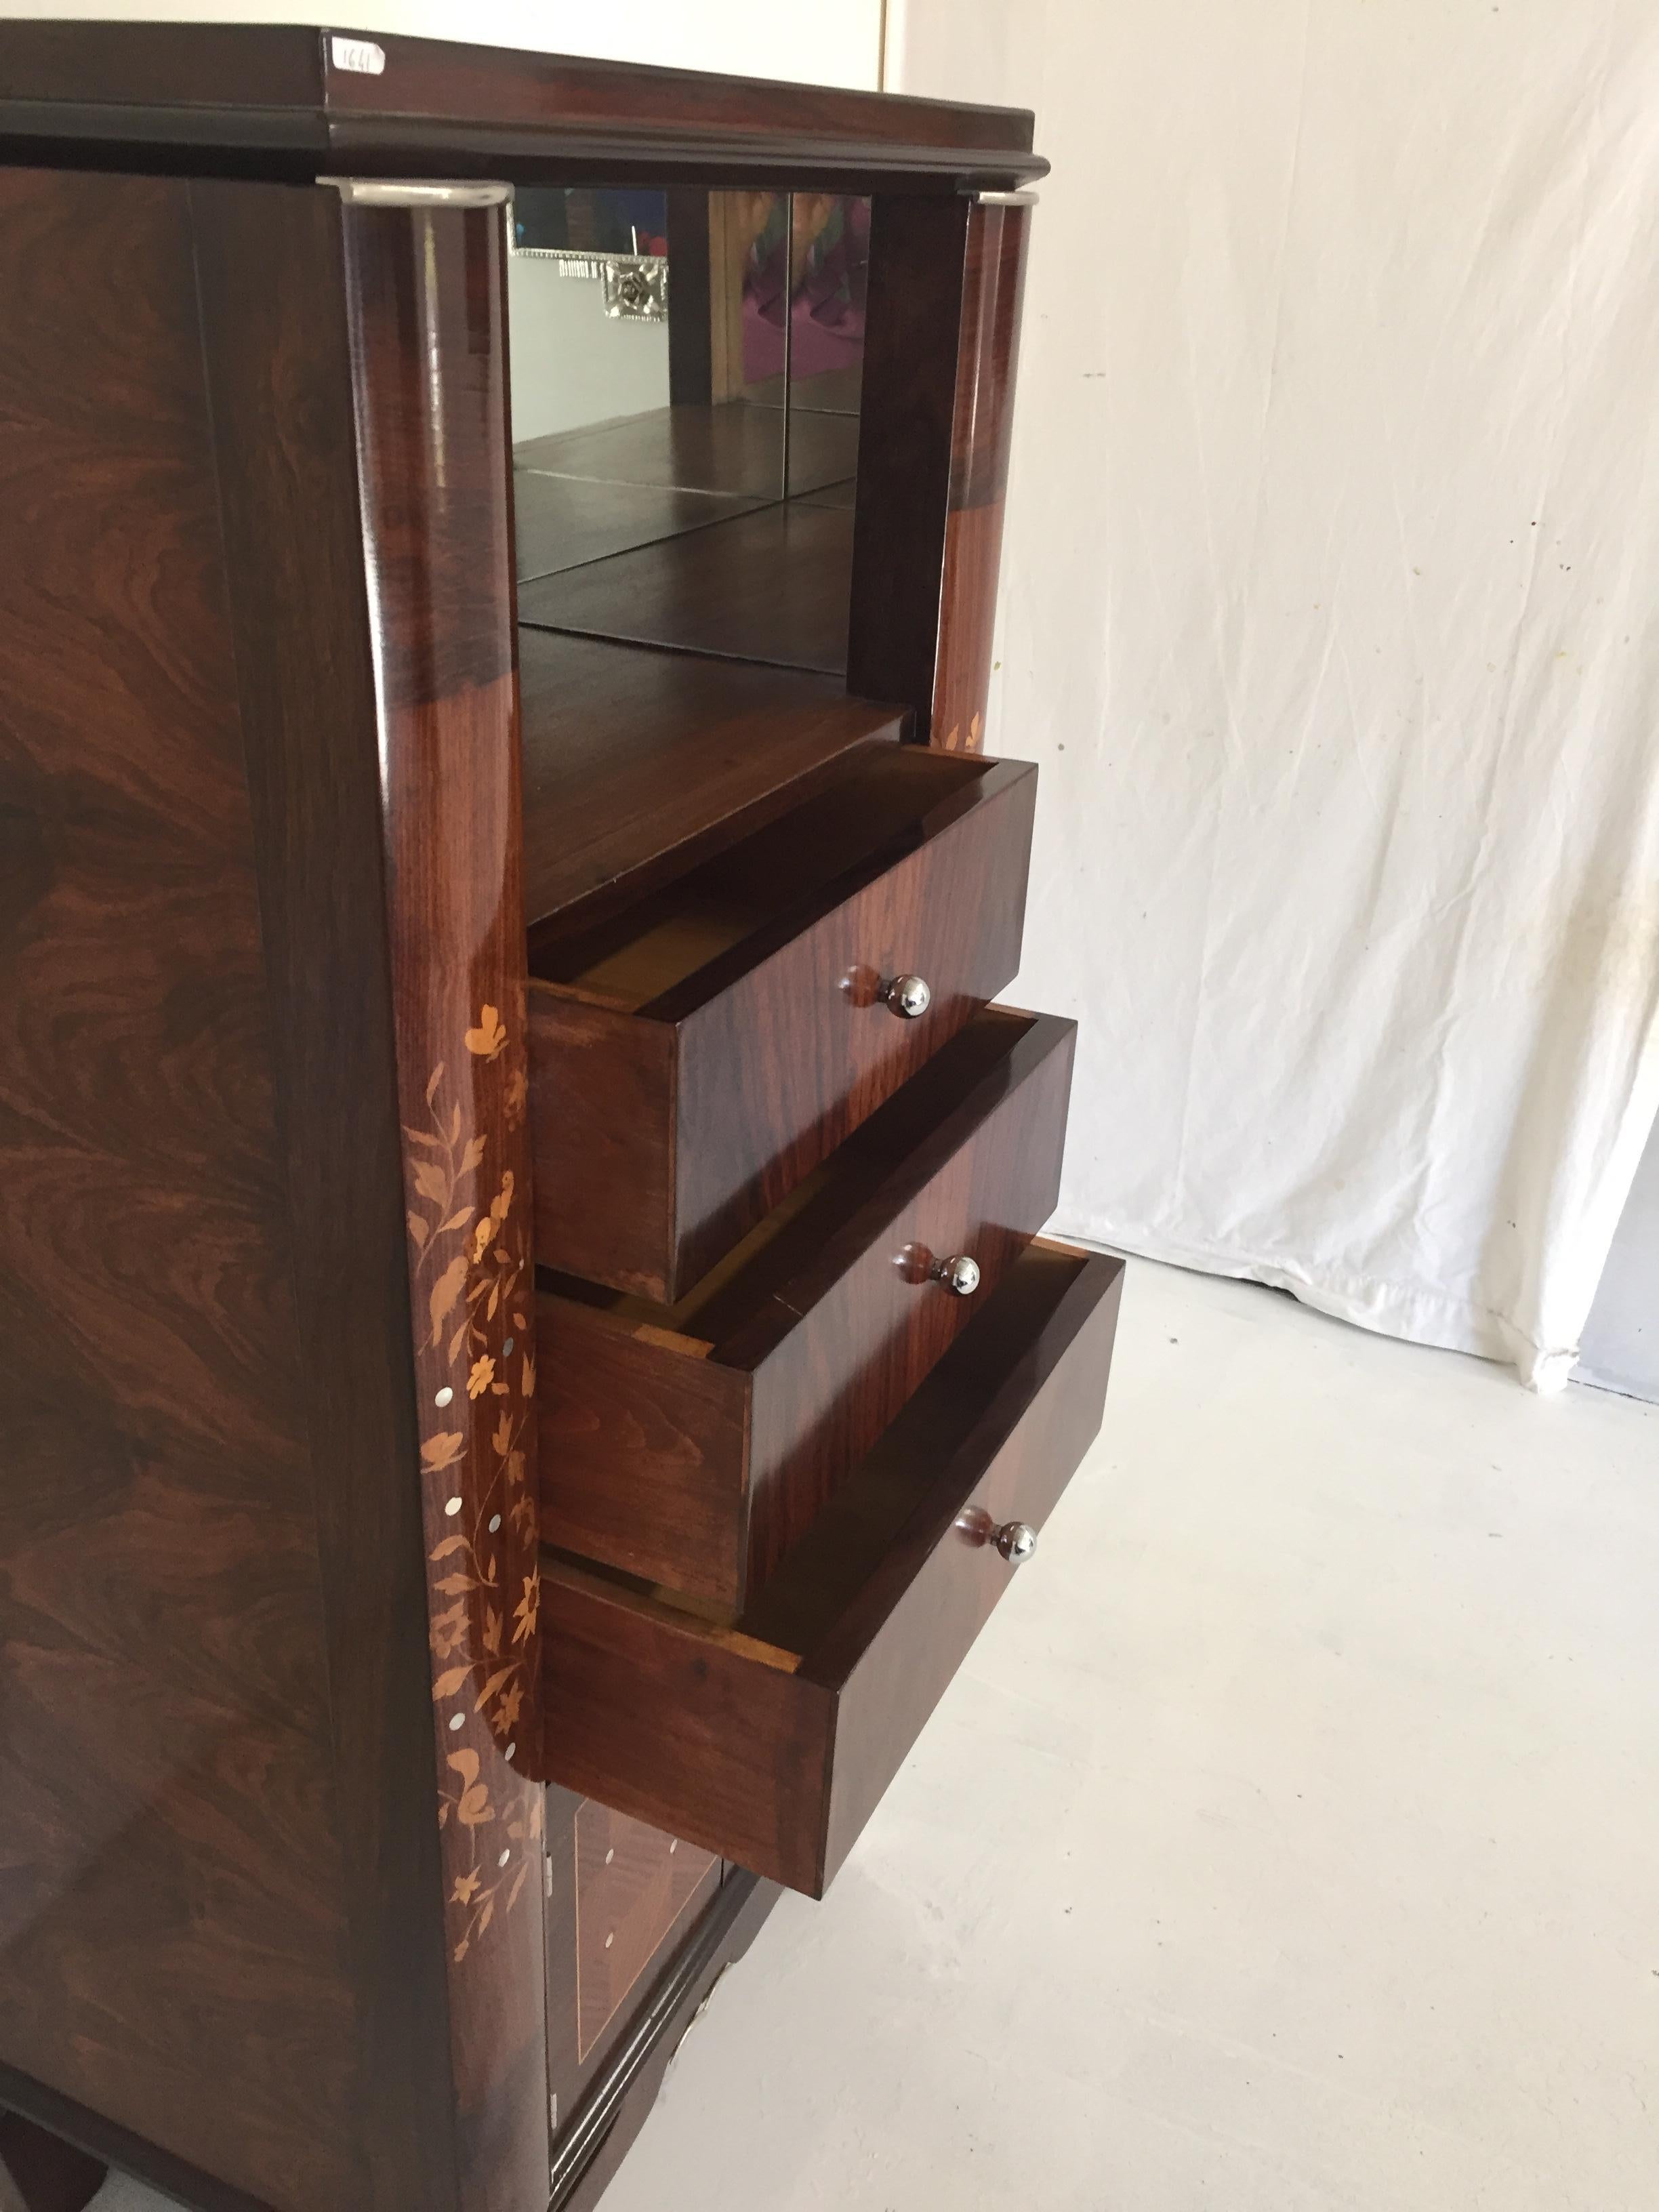 Very refined cabinet in mahogany, in the style of Jules Leleu. could be used in any spots of the house regarding the very harmonious proportions. Three drawers, two doors in the lower part of the piece, the upper part with mirrors.
The condition is